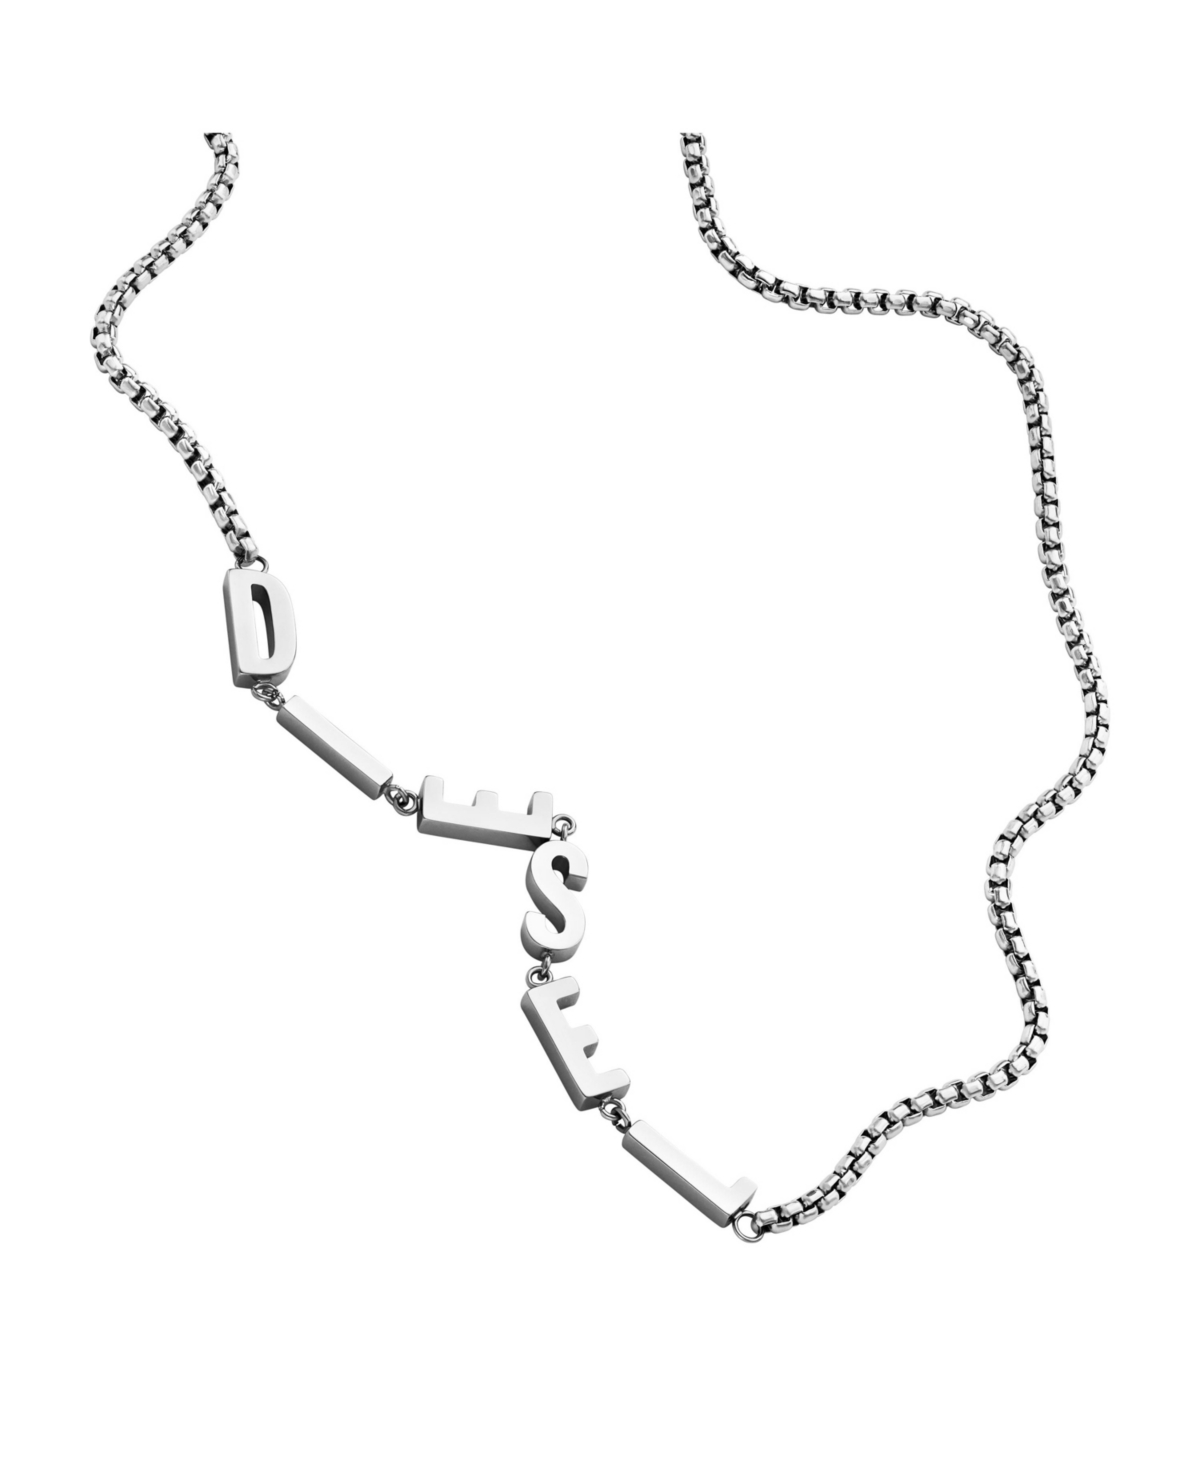 Men's Stainless Steel Chain Necklace, DX1491040 - Silver